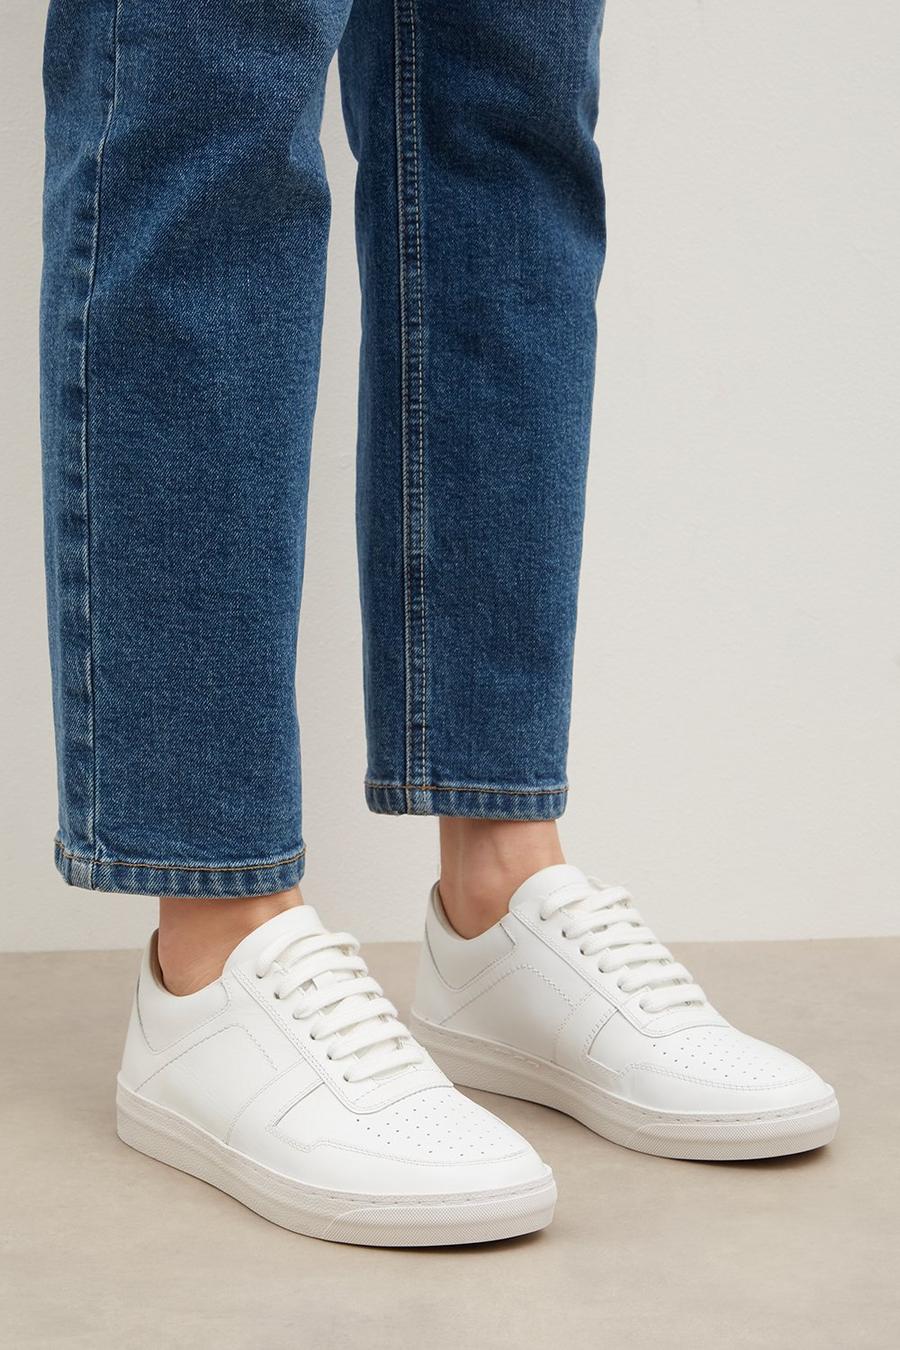 Good For The Sole: Indie Comfort Leather Trainers